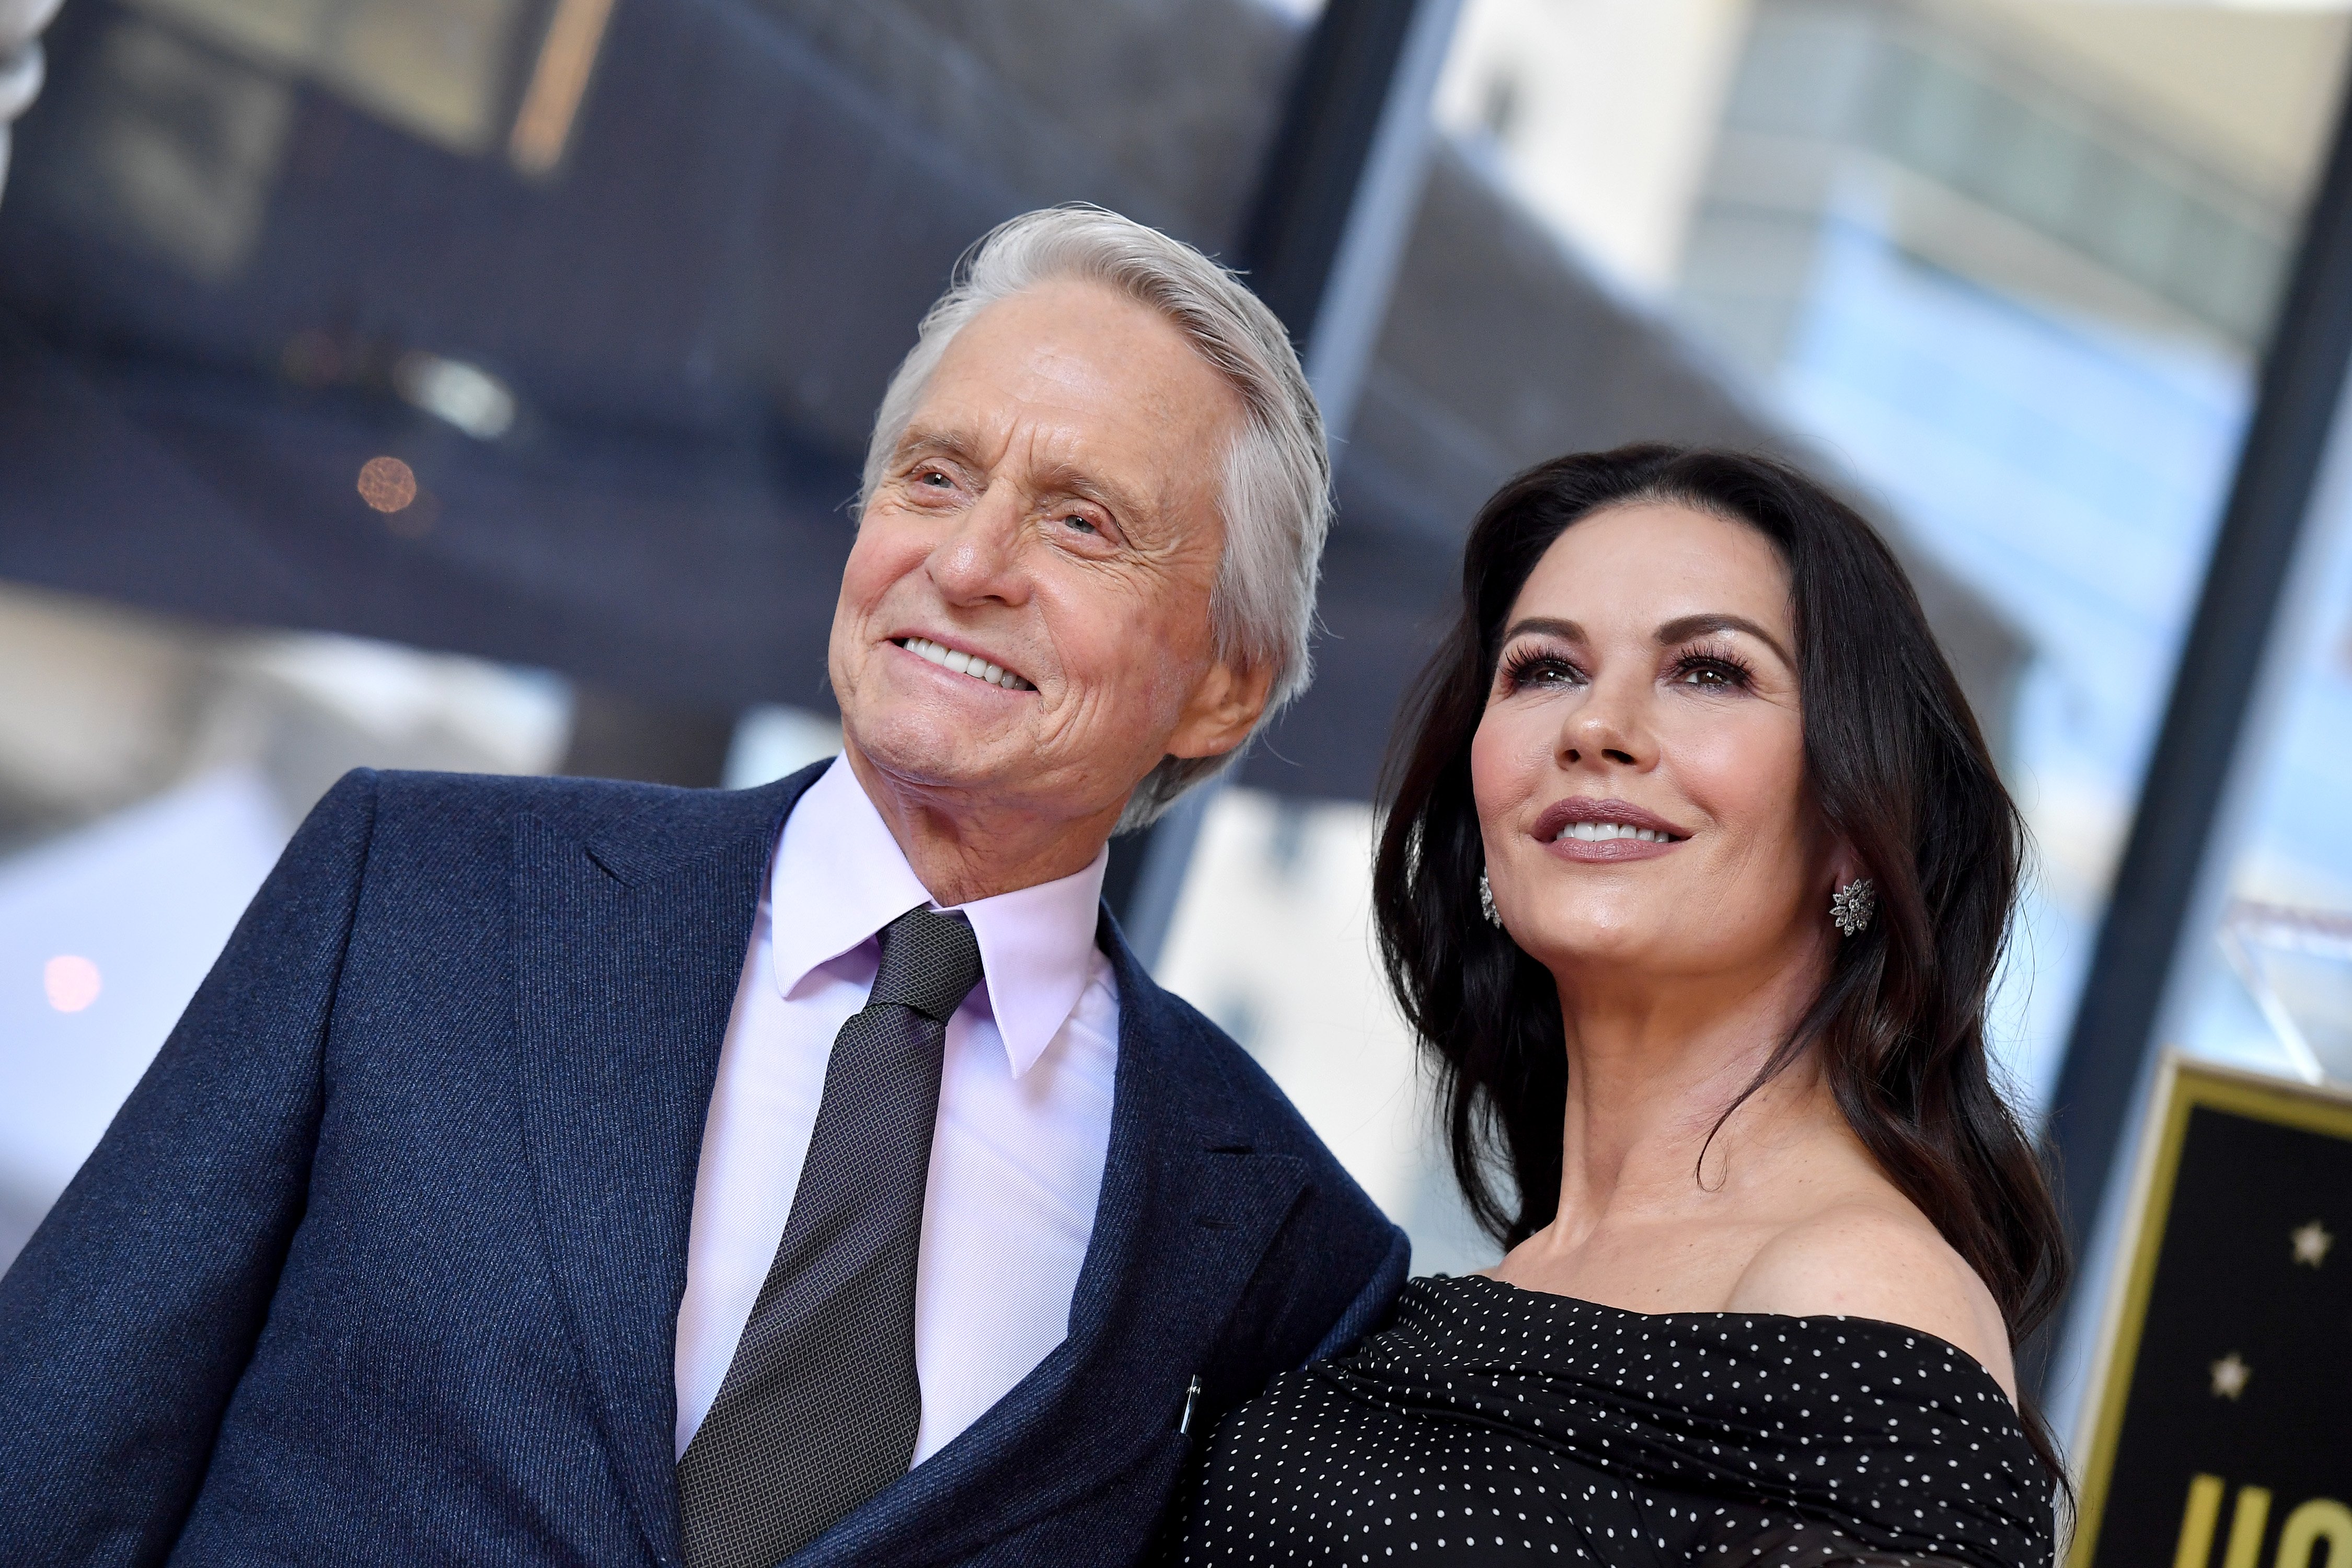 Michael Douglas and Catherine Zeta-Jones attend the ceremony honoring her husband with a star on the Hollywood Walk of Fame on November 6, 2018. | Photo: Getty Images